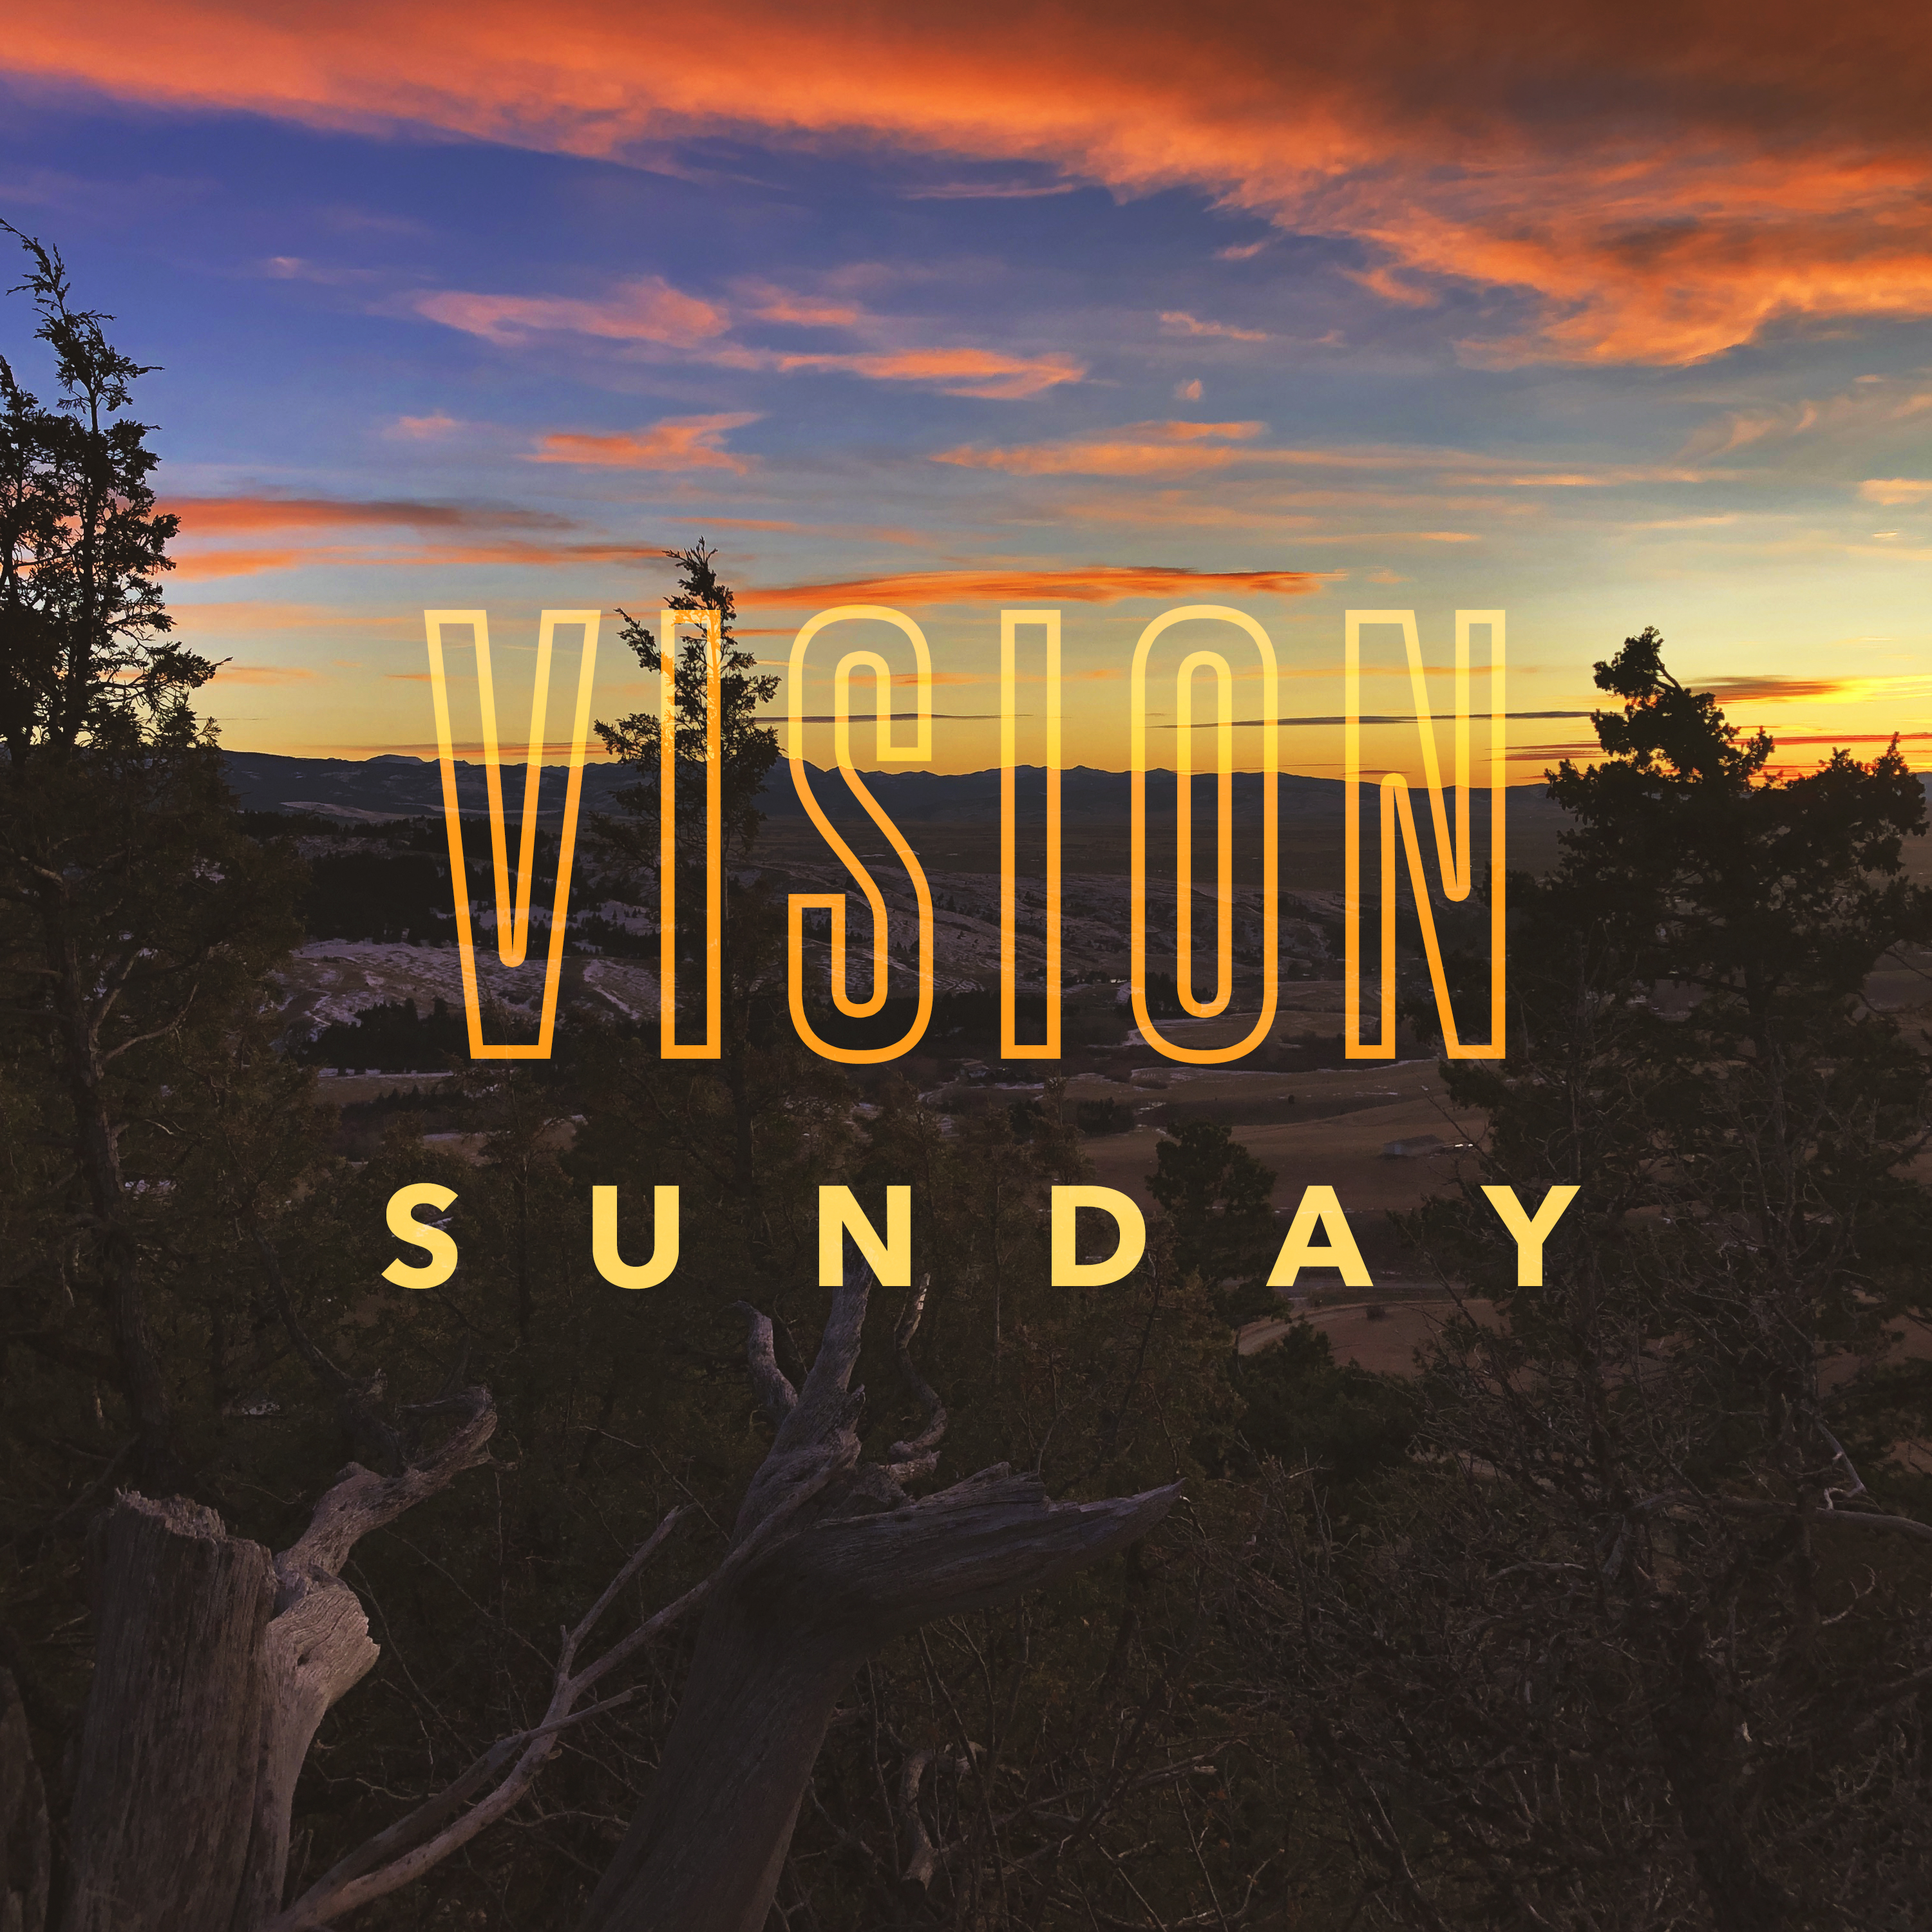 Vision Sunday: Immeasurably More